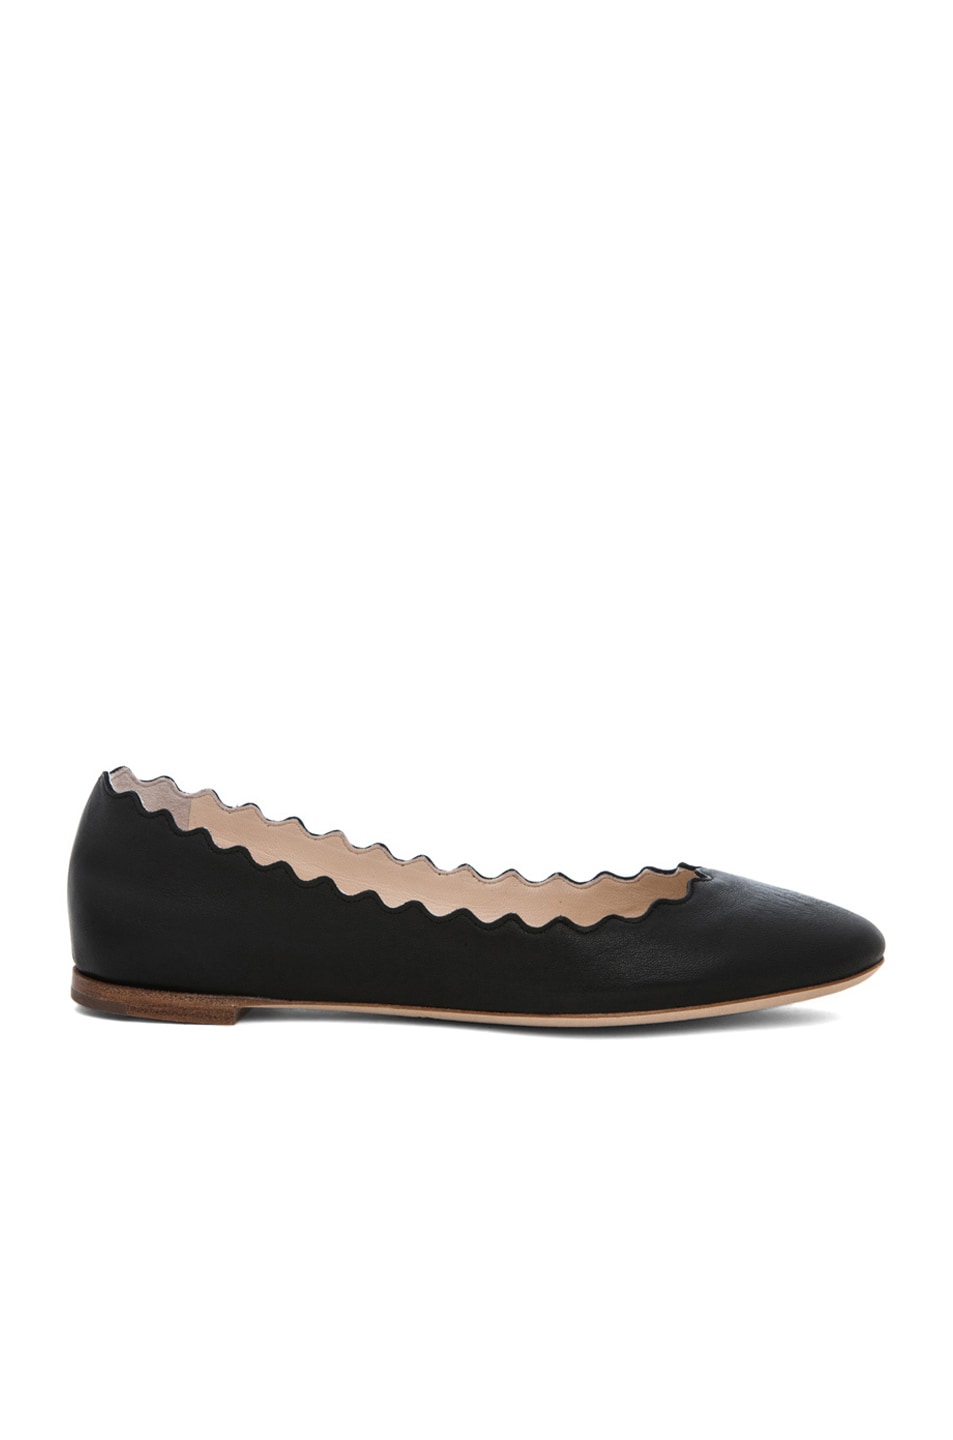 Image 1 of Chloe Leather Scalloped Flats in Black